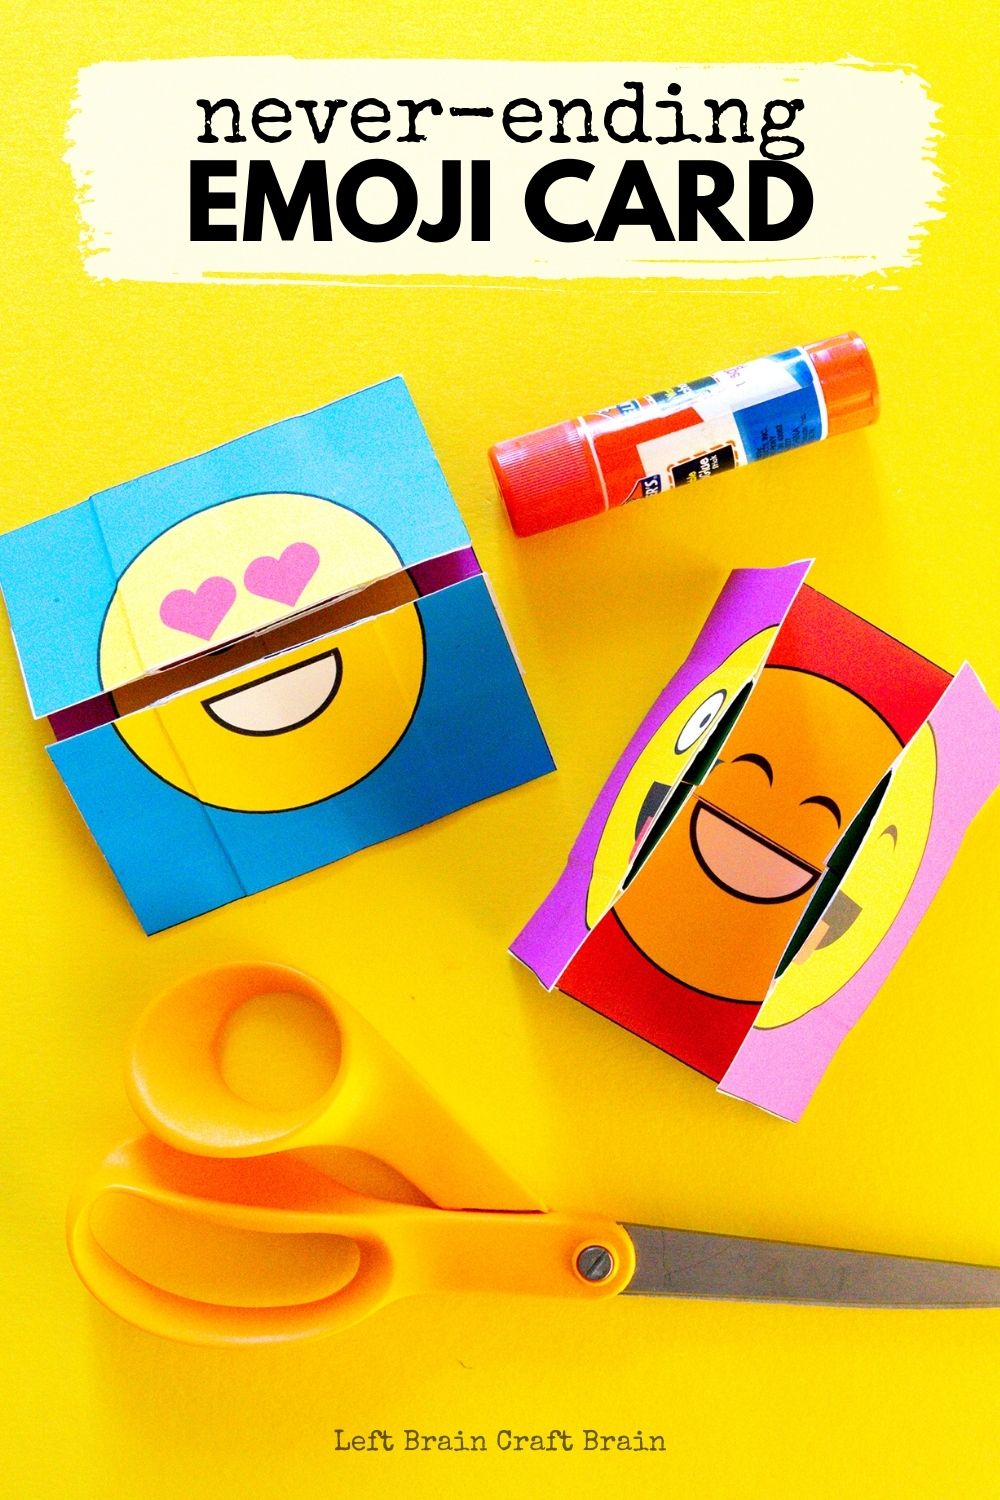 Make this fun never-ending emoji card for an entertaining paper craft activity that will get used long after you've made it. Makes a great gift, too!